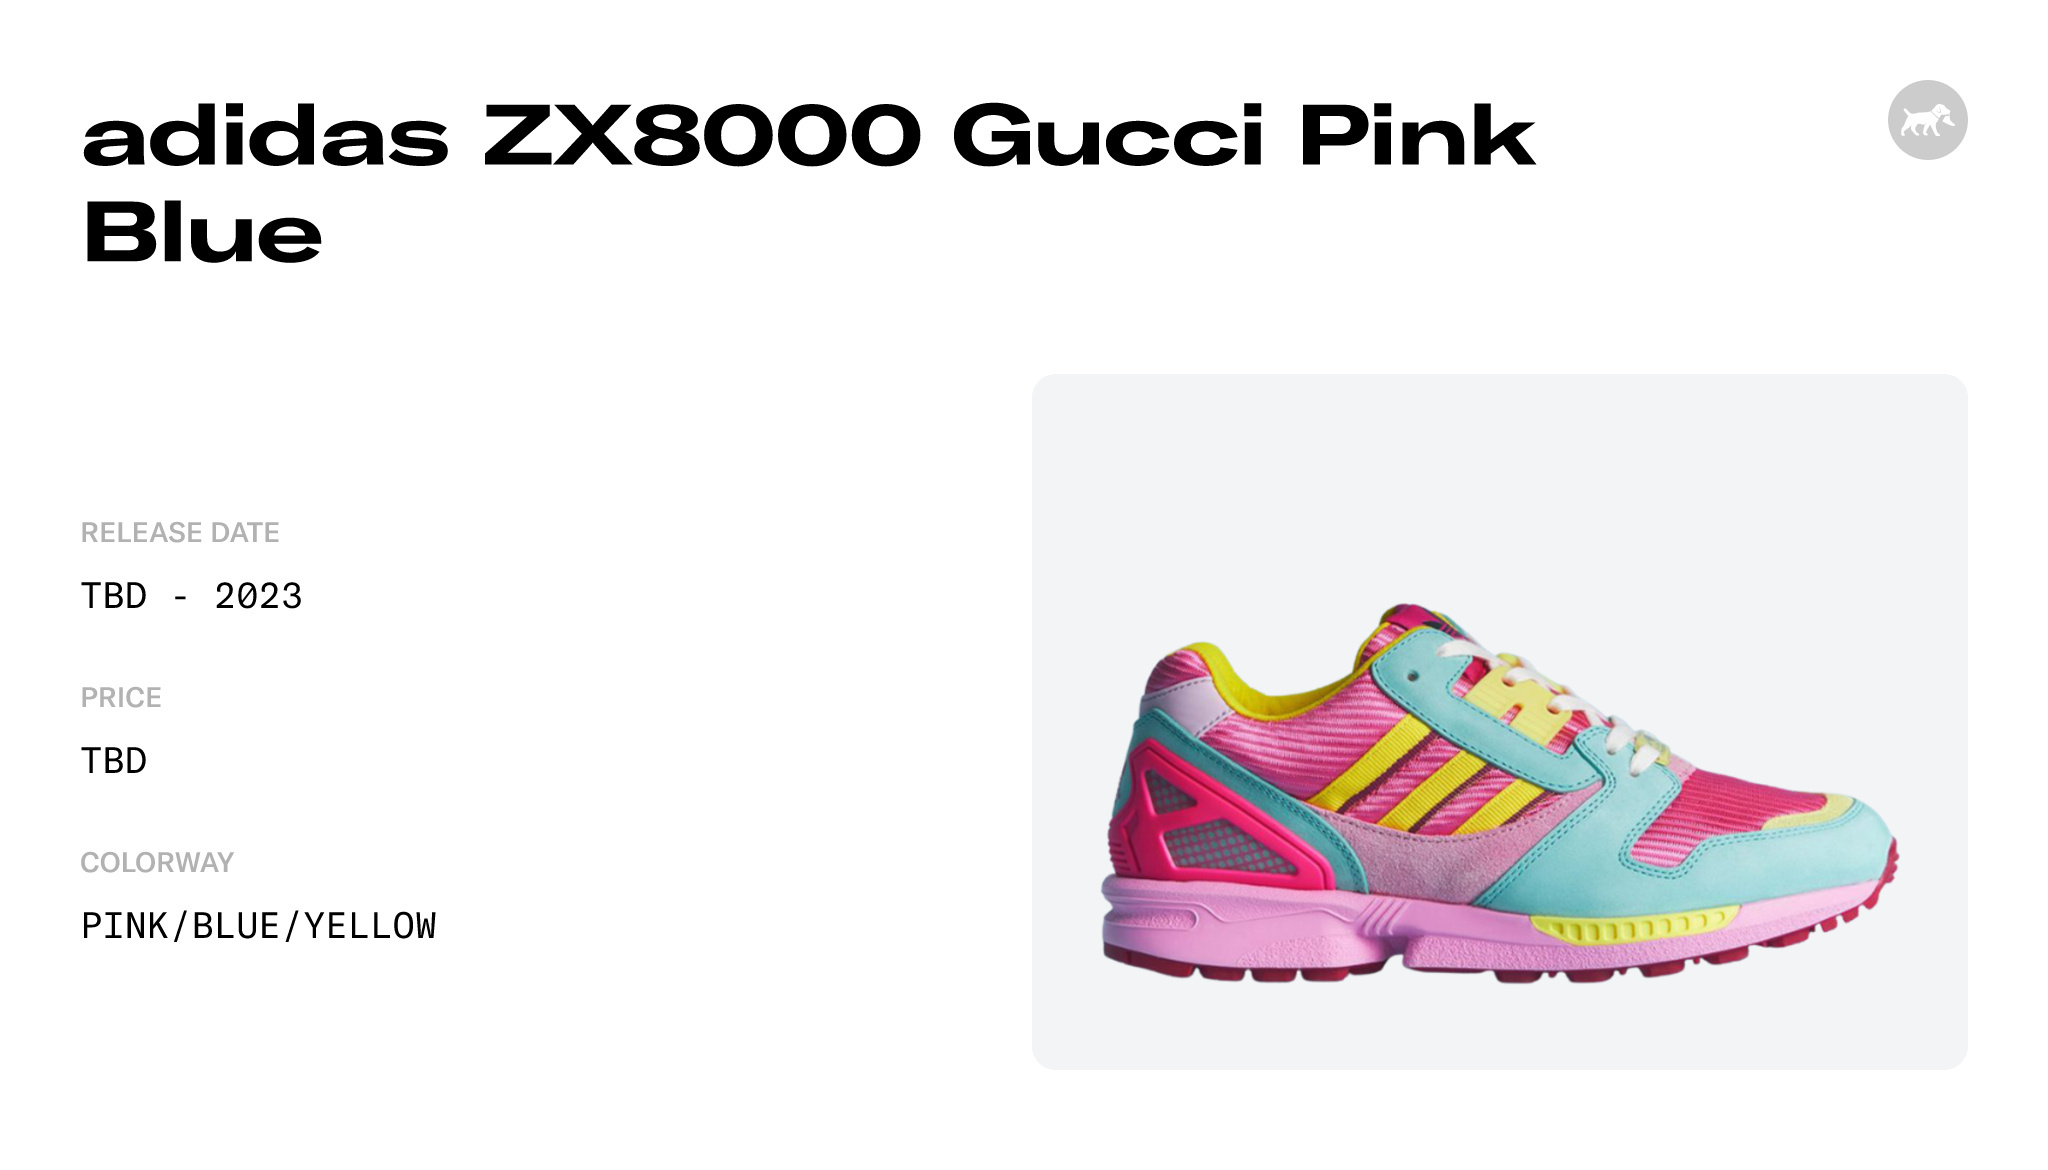 adidas ZX8000 Gucci Pink Blue Raffles and Release Date